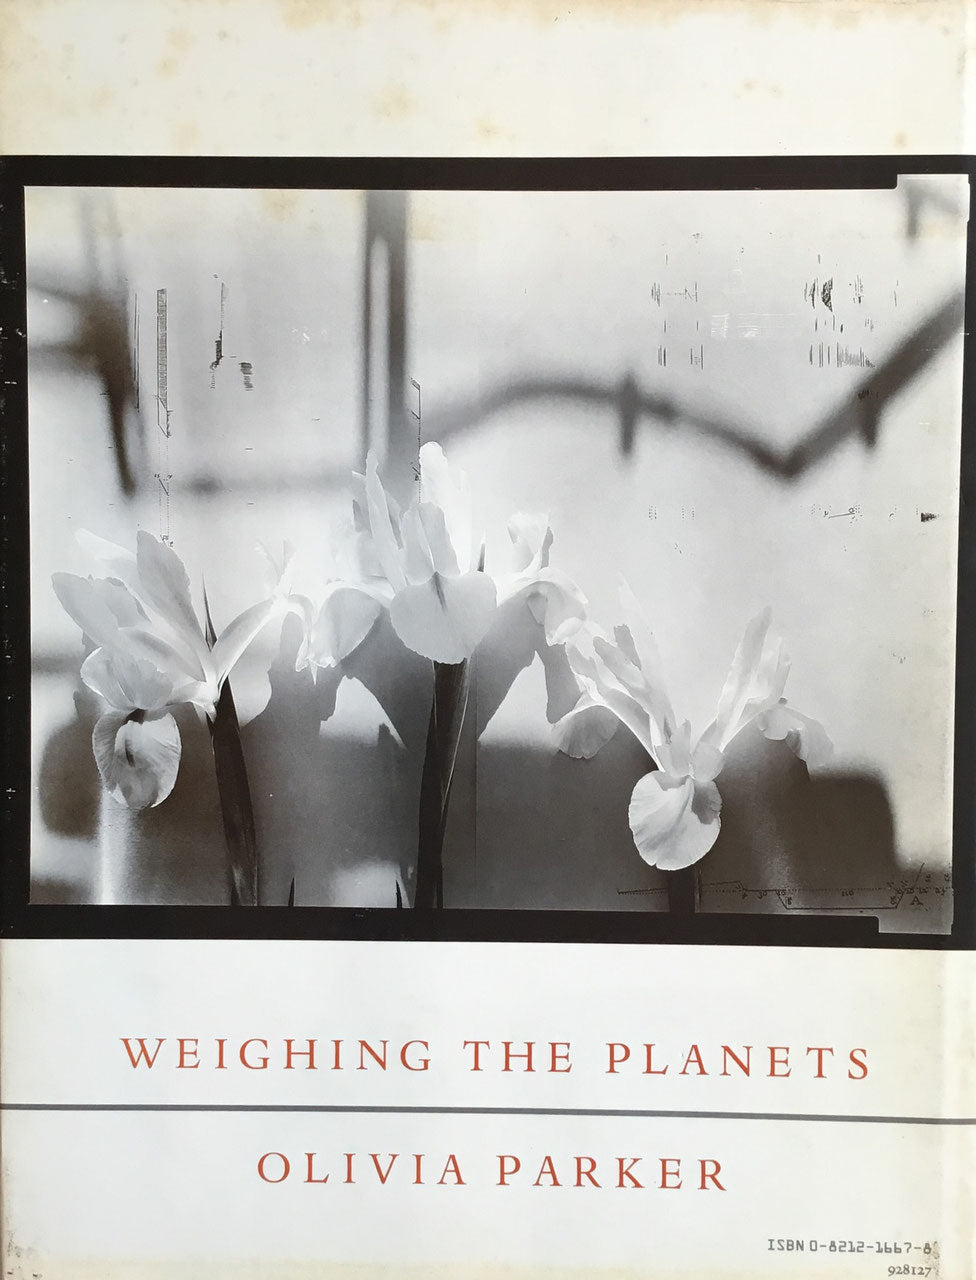 WEIGHING THE PLANETS OLIVIA PARKER オリヴィア・パーカー写真集 